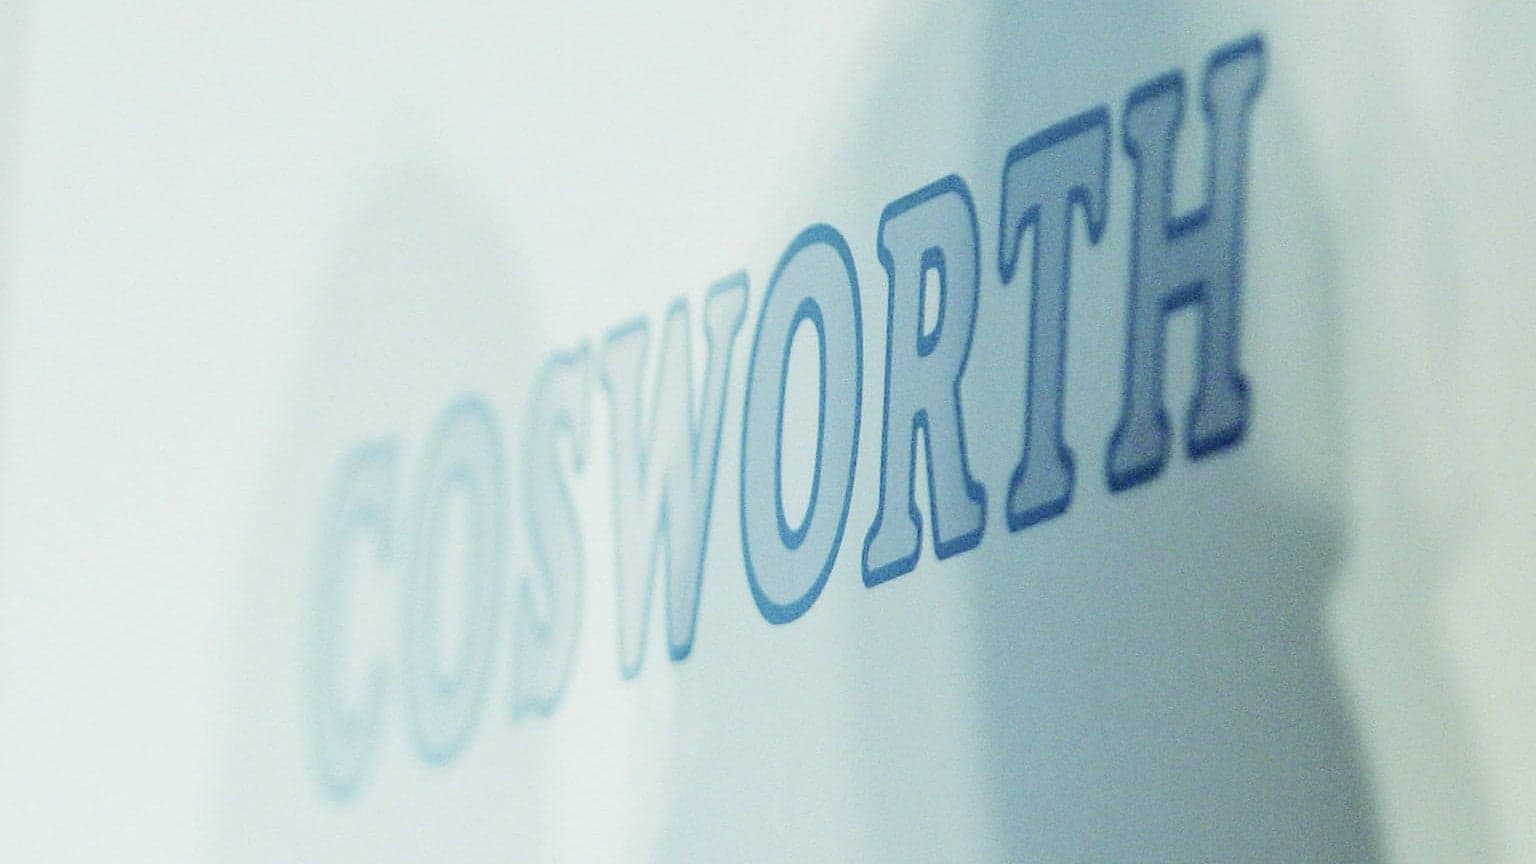 Cosworth Wants to Return to Formula One in 2021